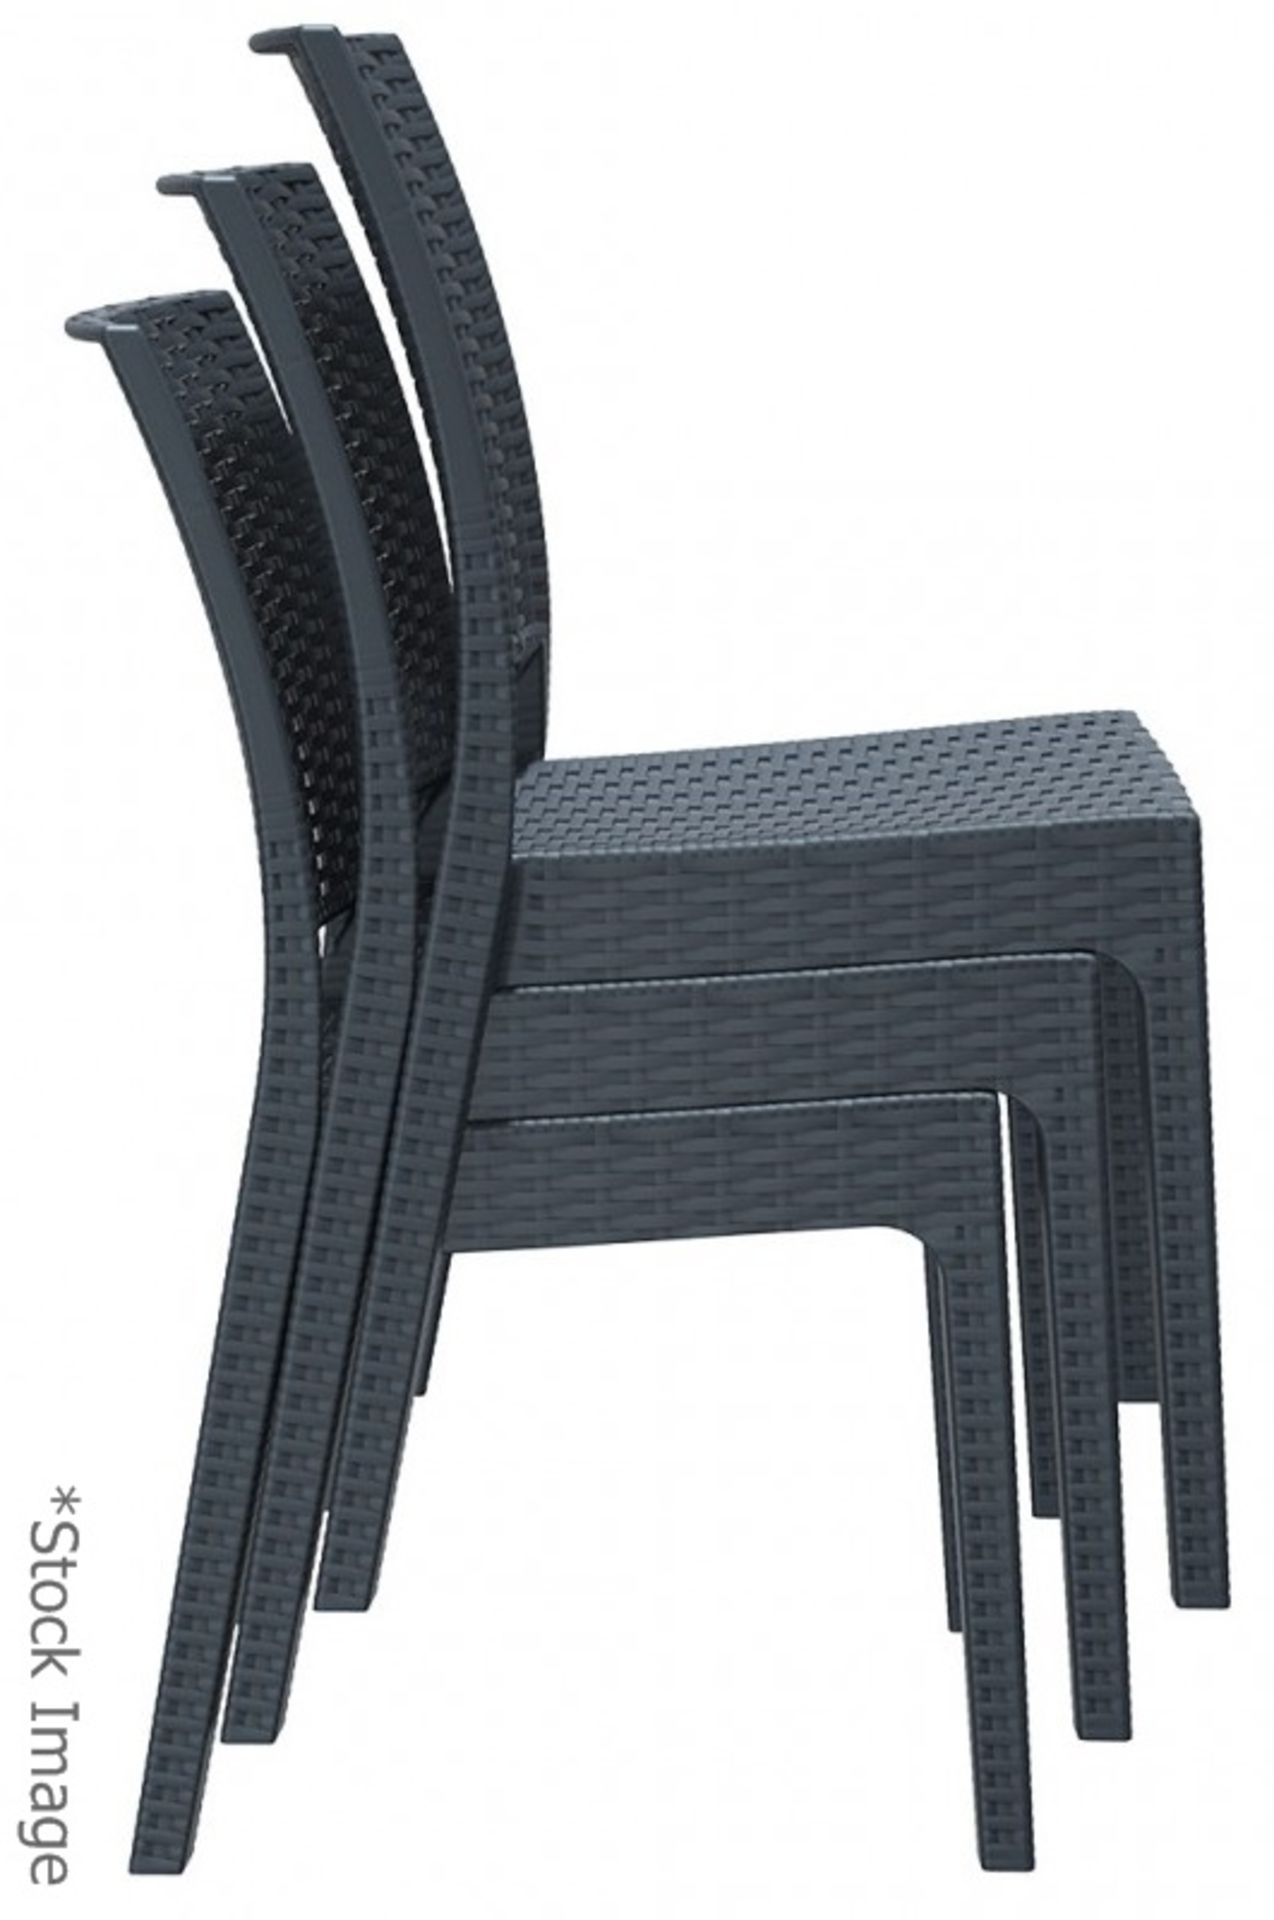 4 x SIESTA EXCLUSIVE 'Florida' Commercial Stackable Rattan-style Chairs In Dark Grey - RRP £320.00 - Image 10 of 13